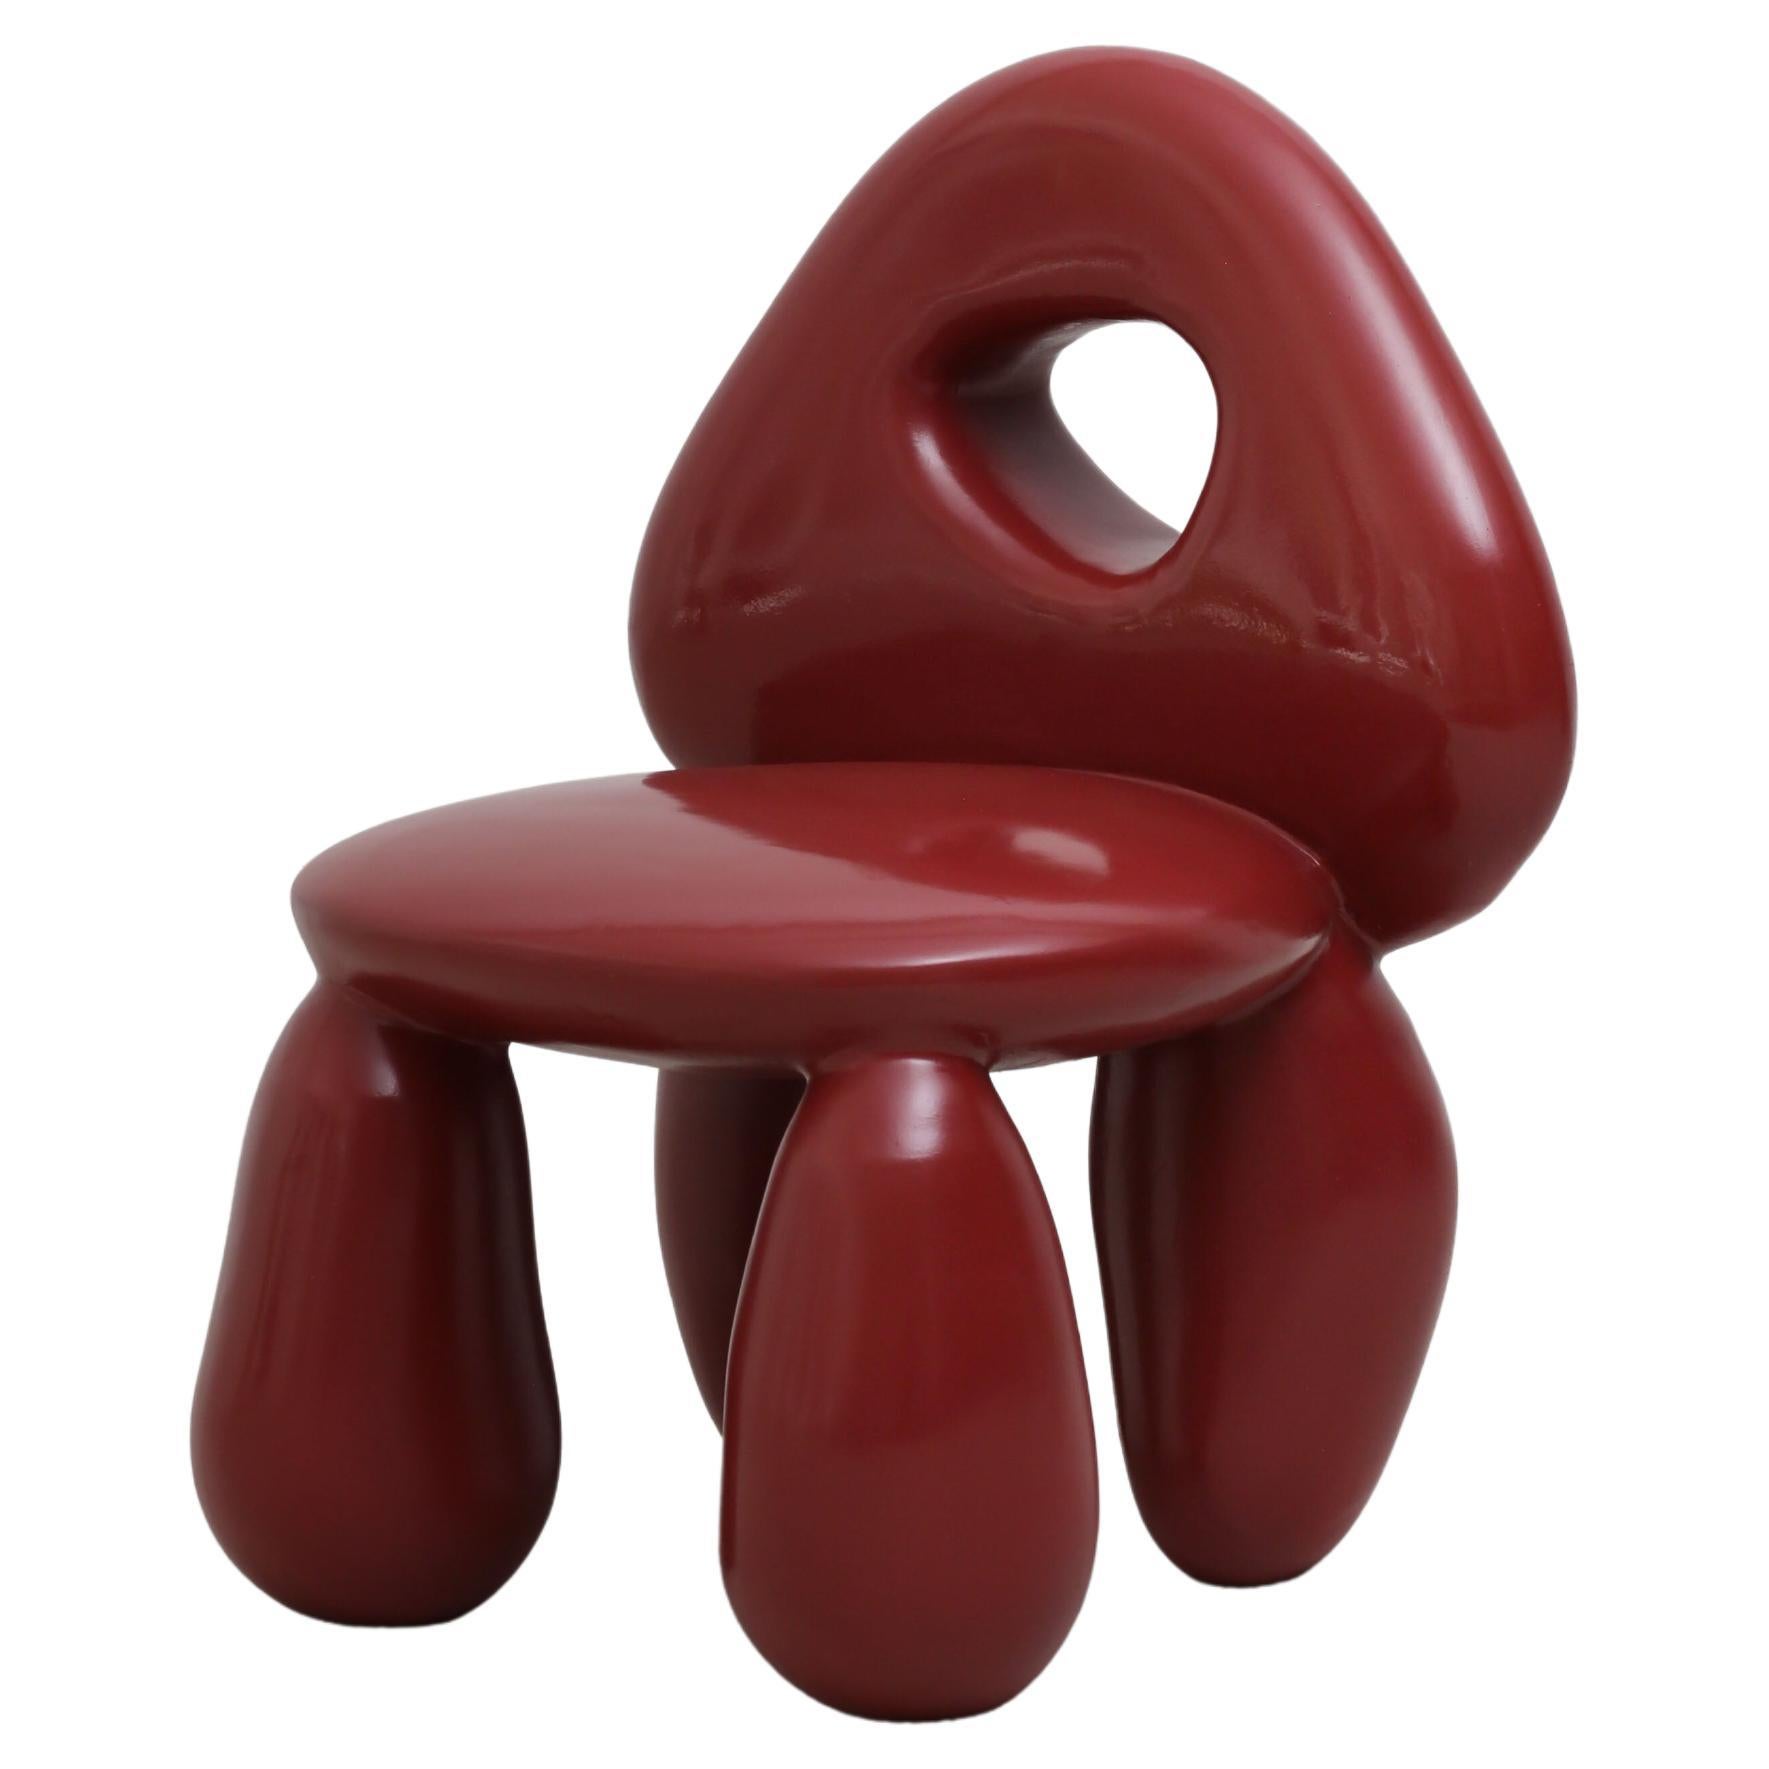 Postmodern-Inspired Accent Chair and Sculpture, Behsheen Chair with Hole